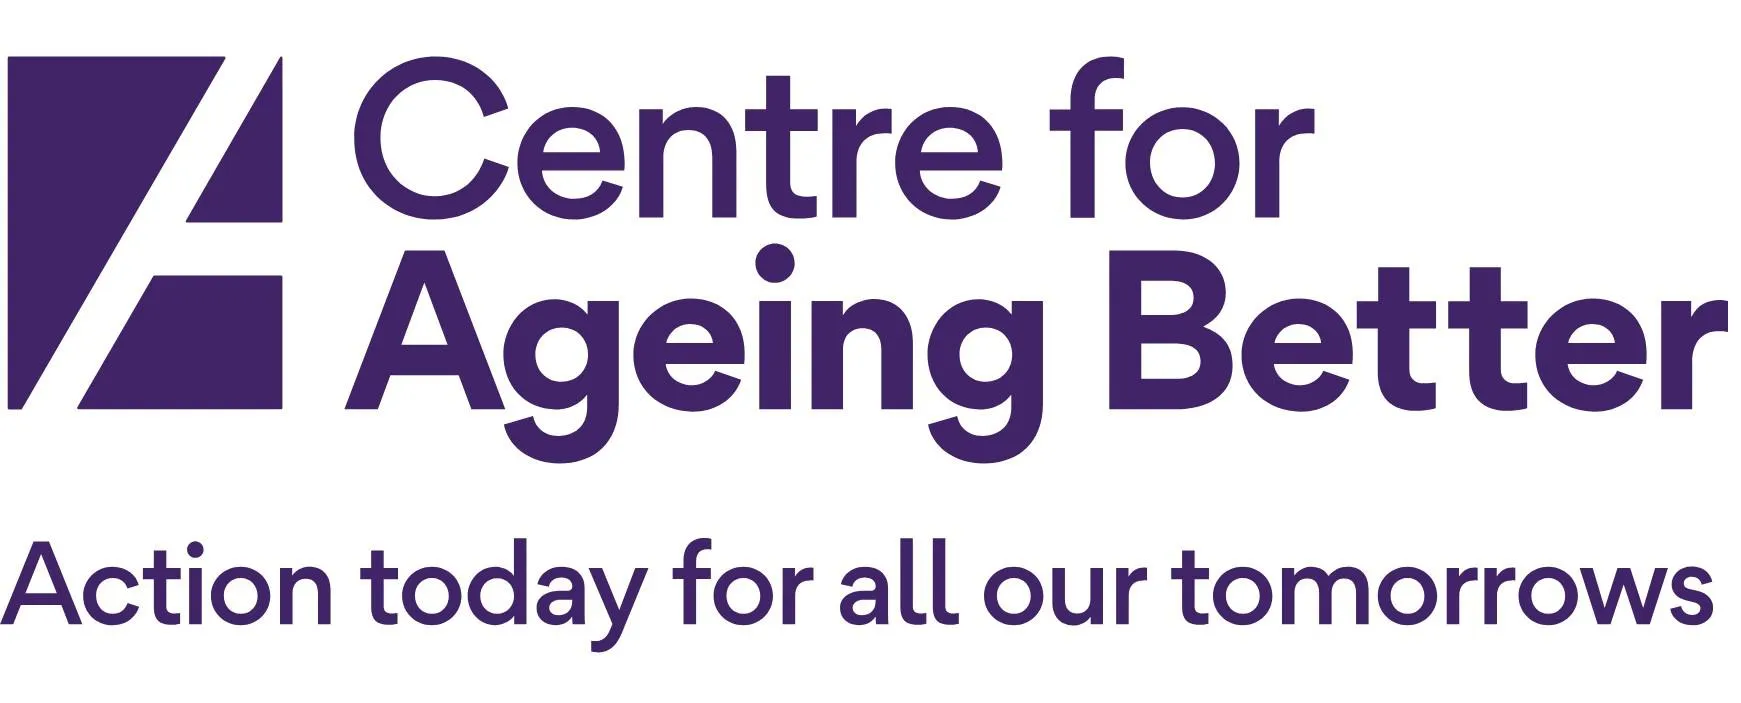 Logo with written text - Centre for Ageing Better: Action today for all our tomorrows - in purple